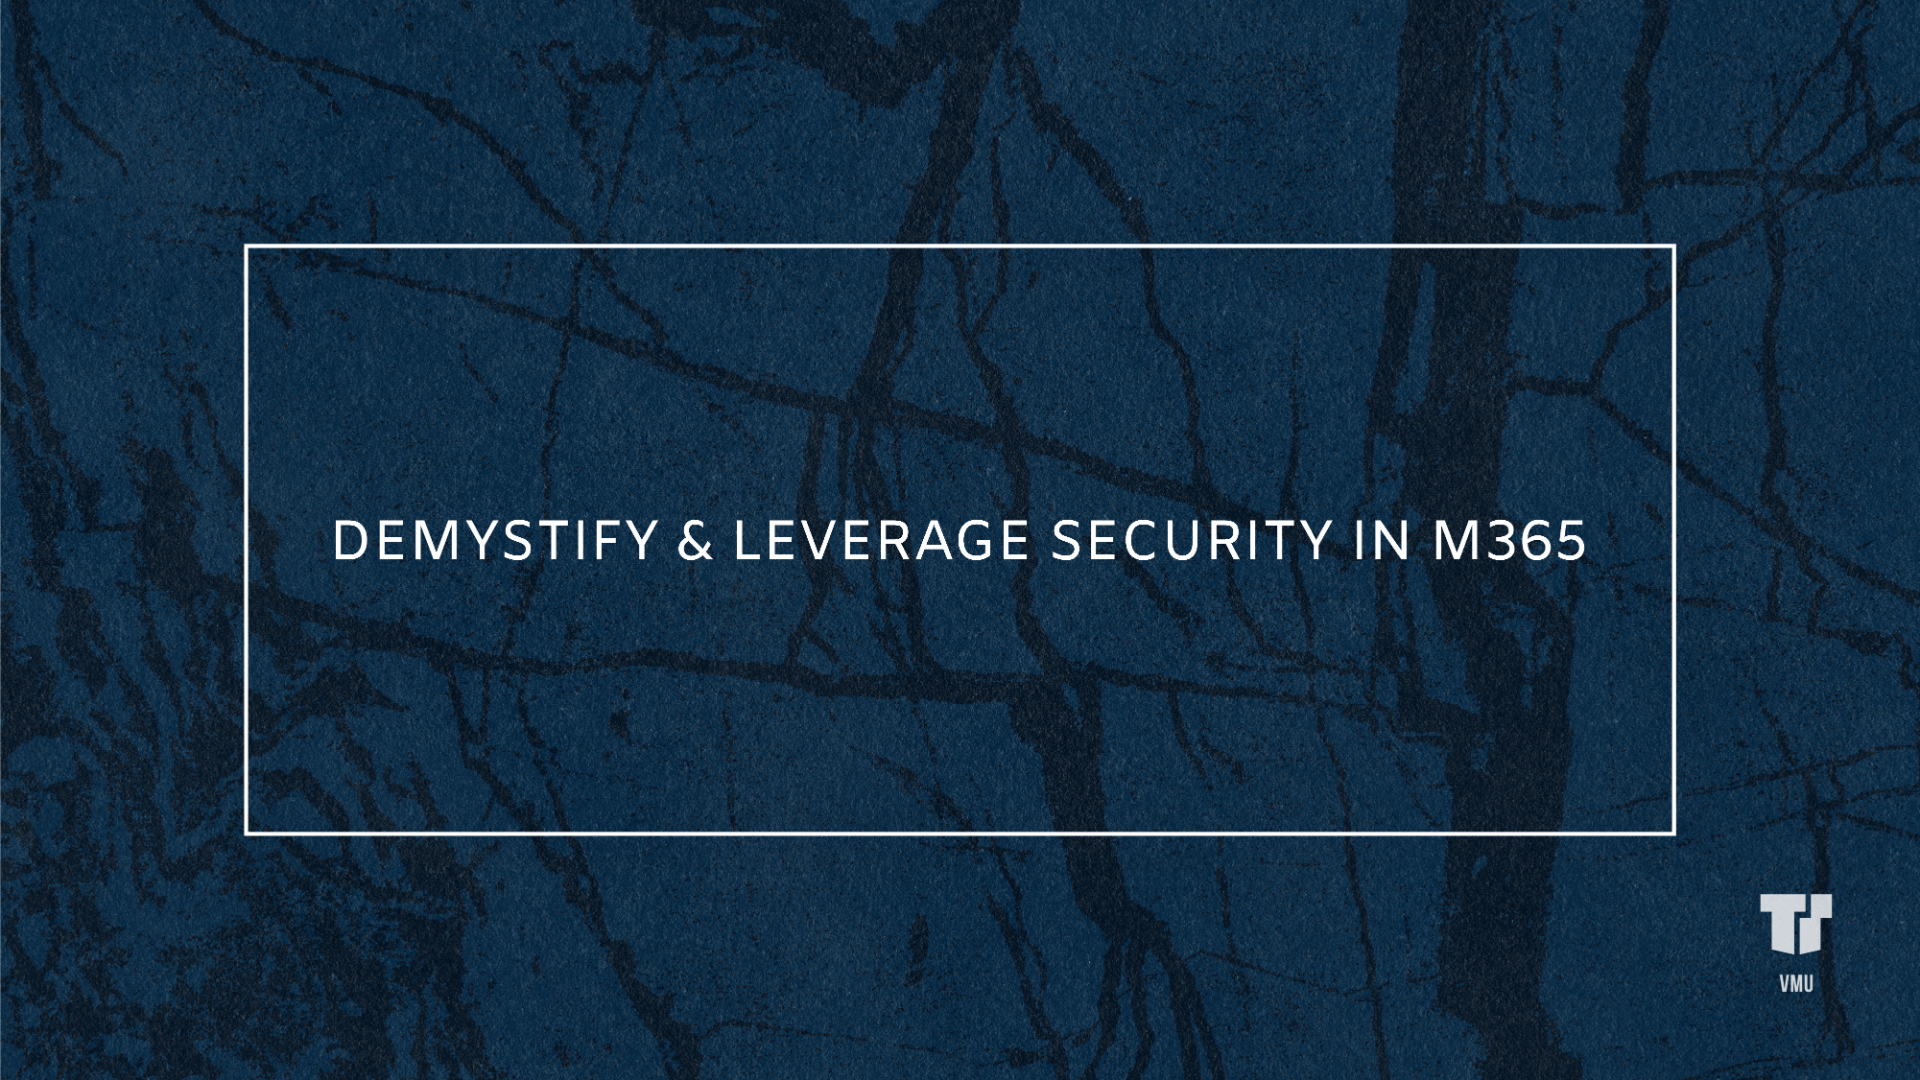 Demystify & Leverage Security in M365 cover image